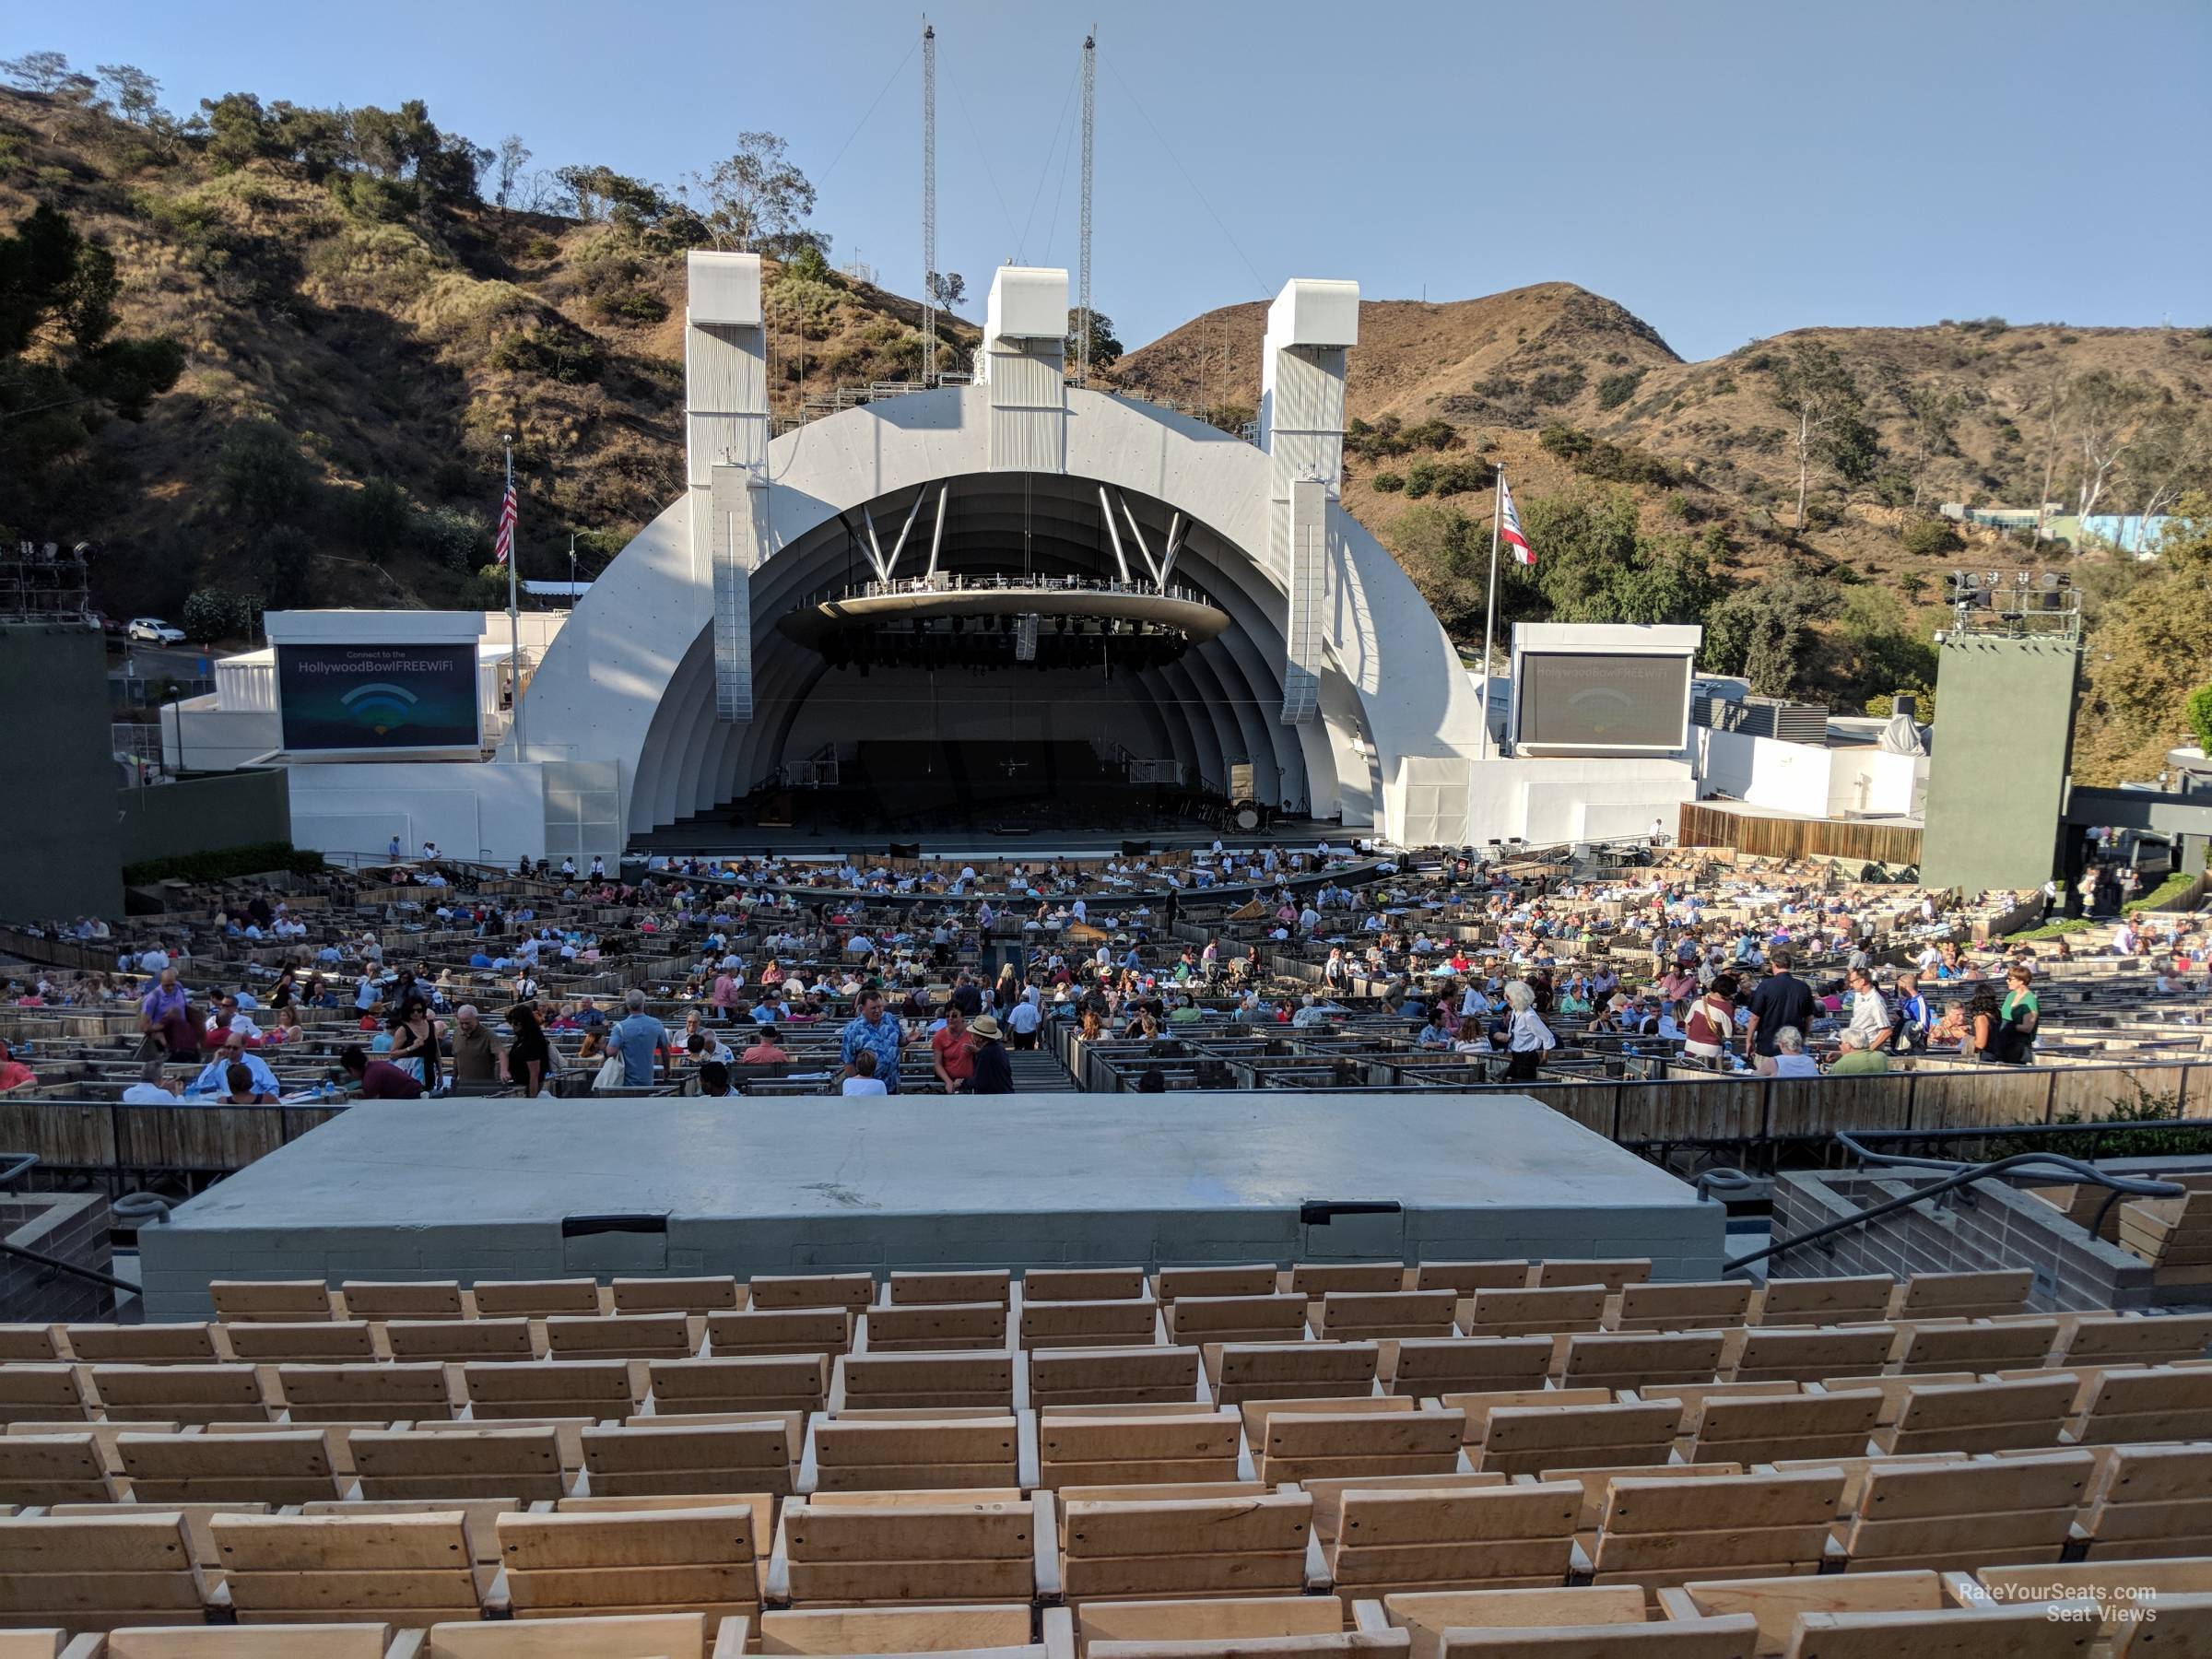 section j1, row 13 seat view  - hollywood bowl